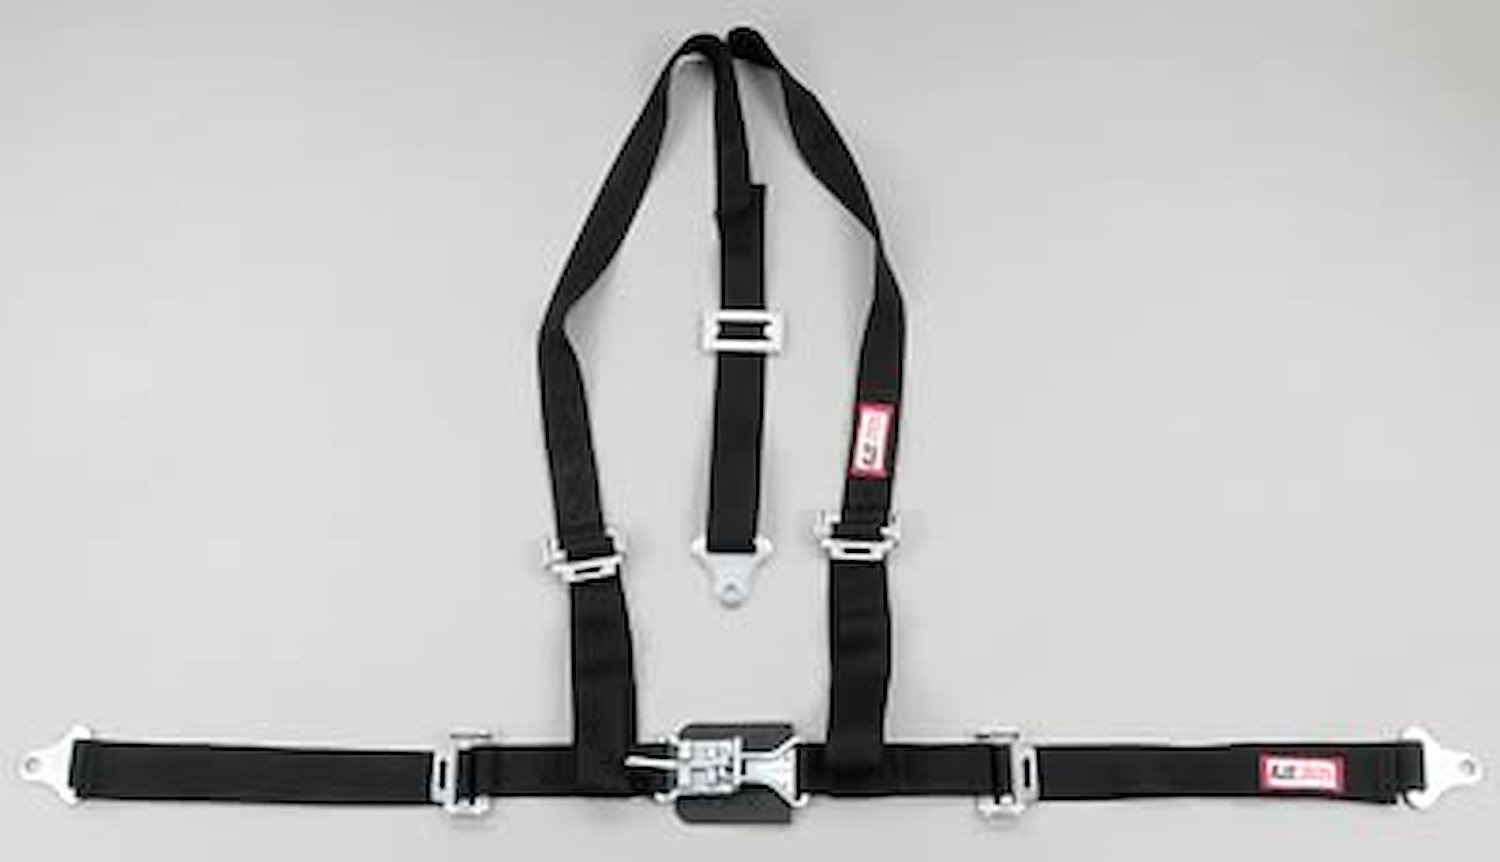 NON-SFI L&L HARNESS 2 PULL UP Lap Belt SEWN IN 2 S.H. Individual ROLL BAR Mount ALL WRAP ENDS BLACK